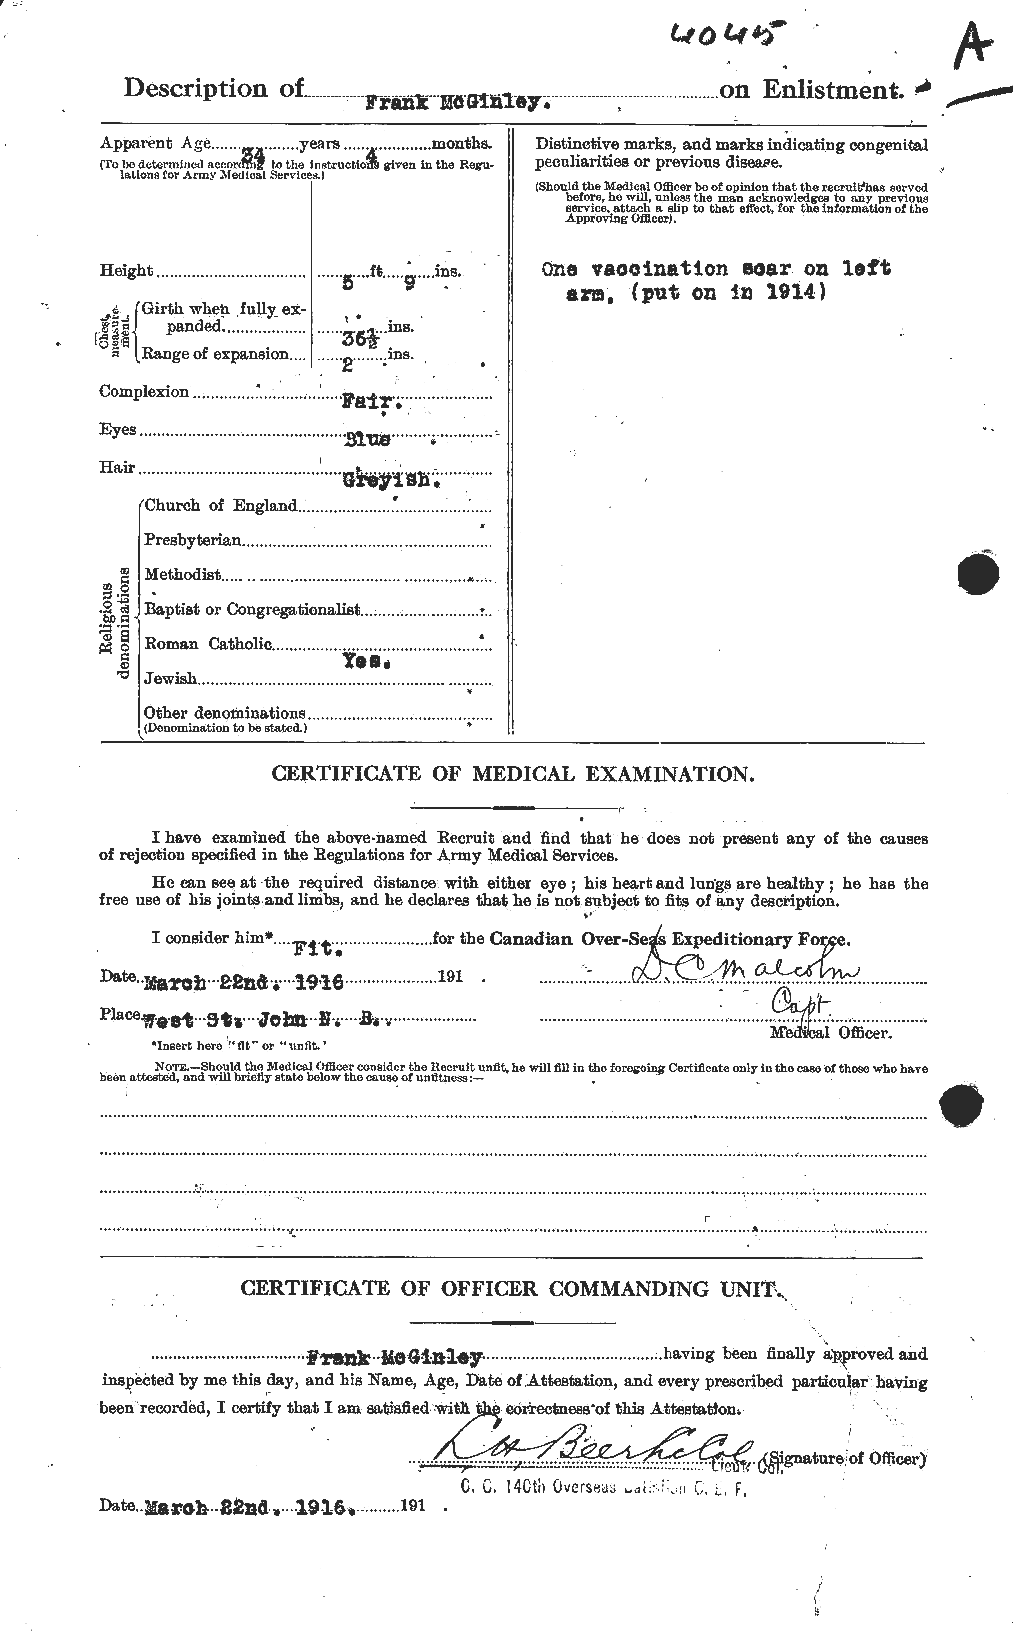 Personnel Records of the First World War - CEF 526313b